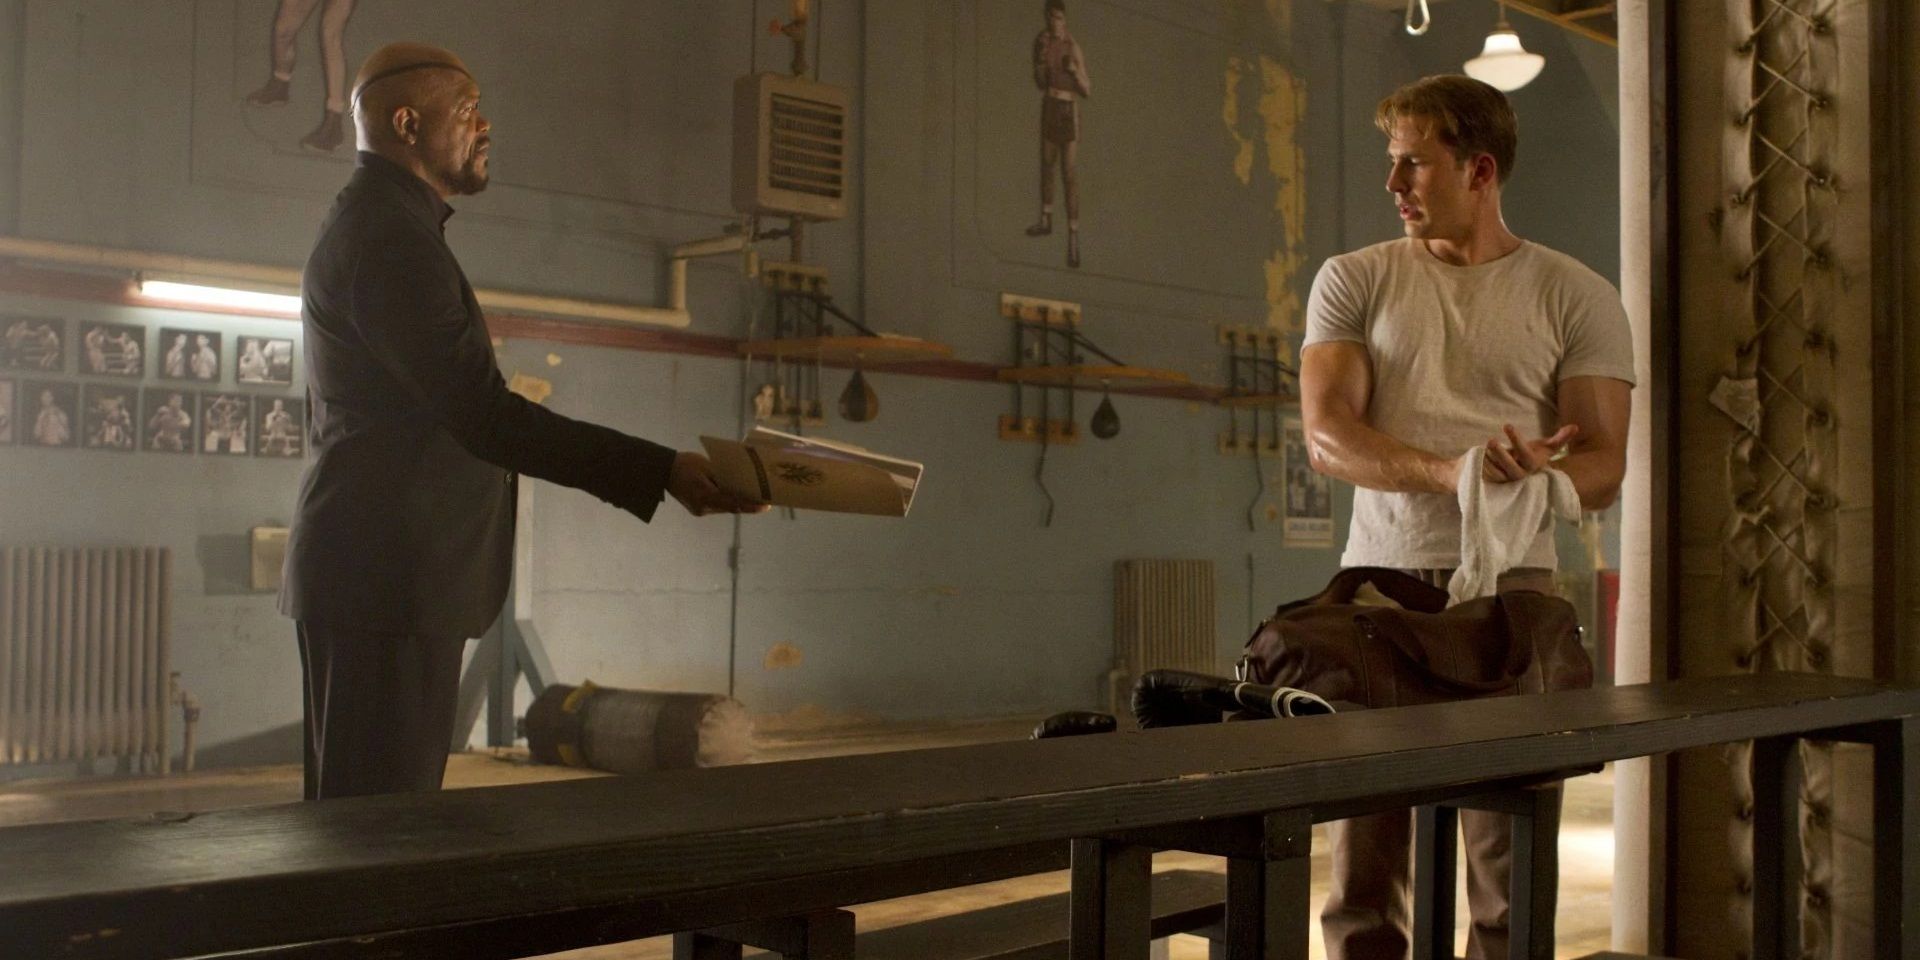 Nick Fury Handing Steve Rogers A File In Fogwell's Gym From Captain America The First Avenger.